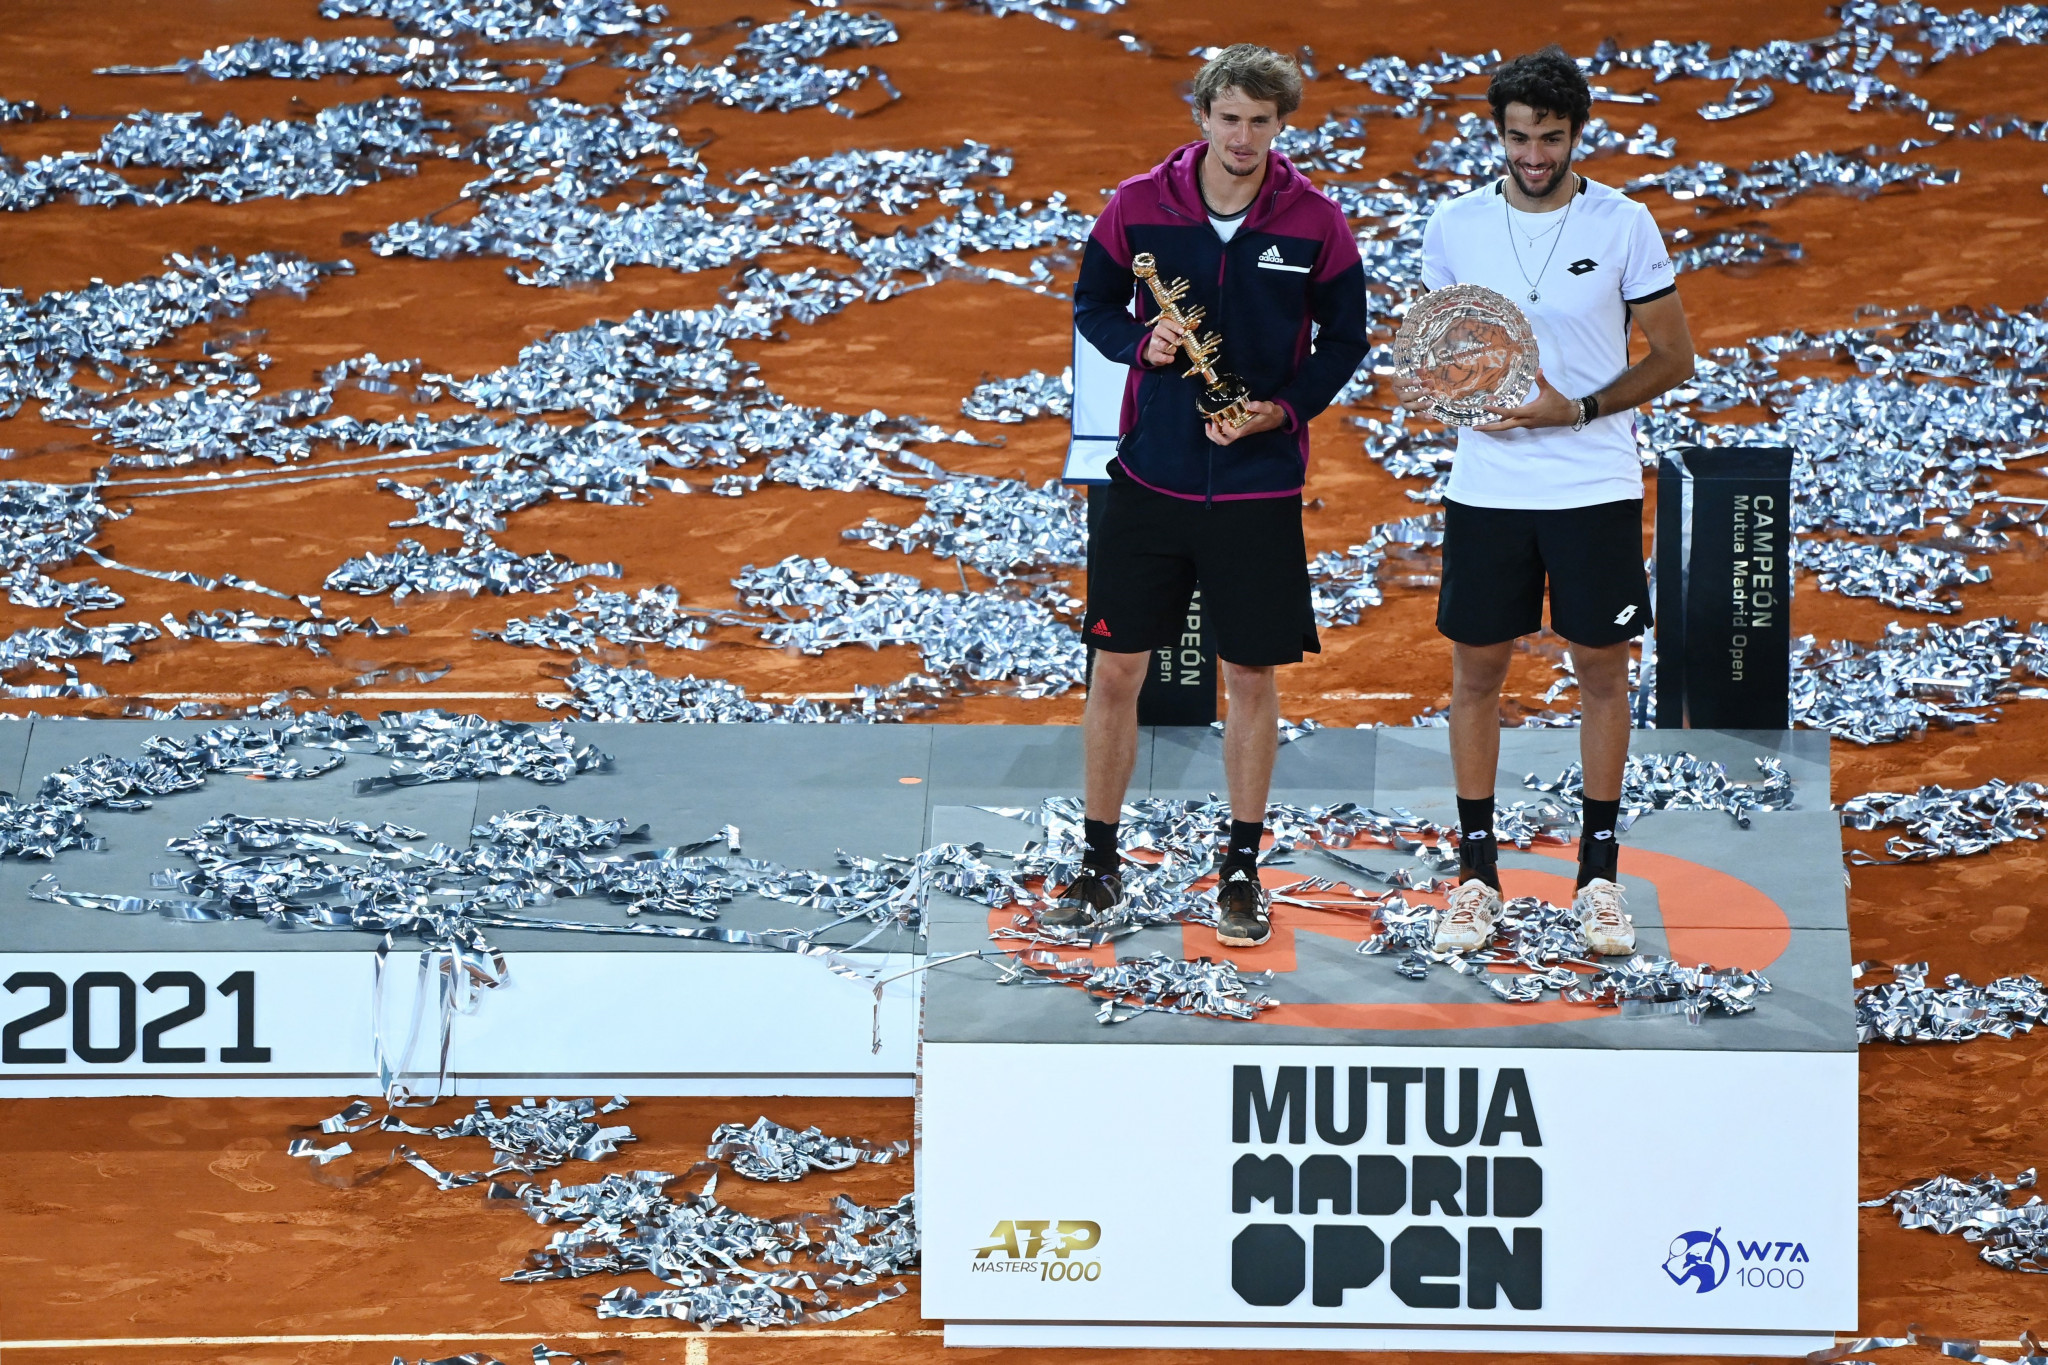 Madrid Open has joined IMG's portfolio of tennis tournaments ©Getty Images